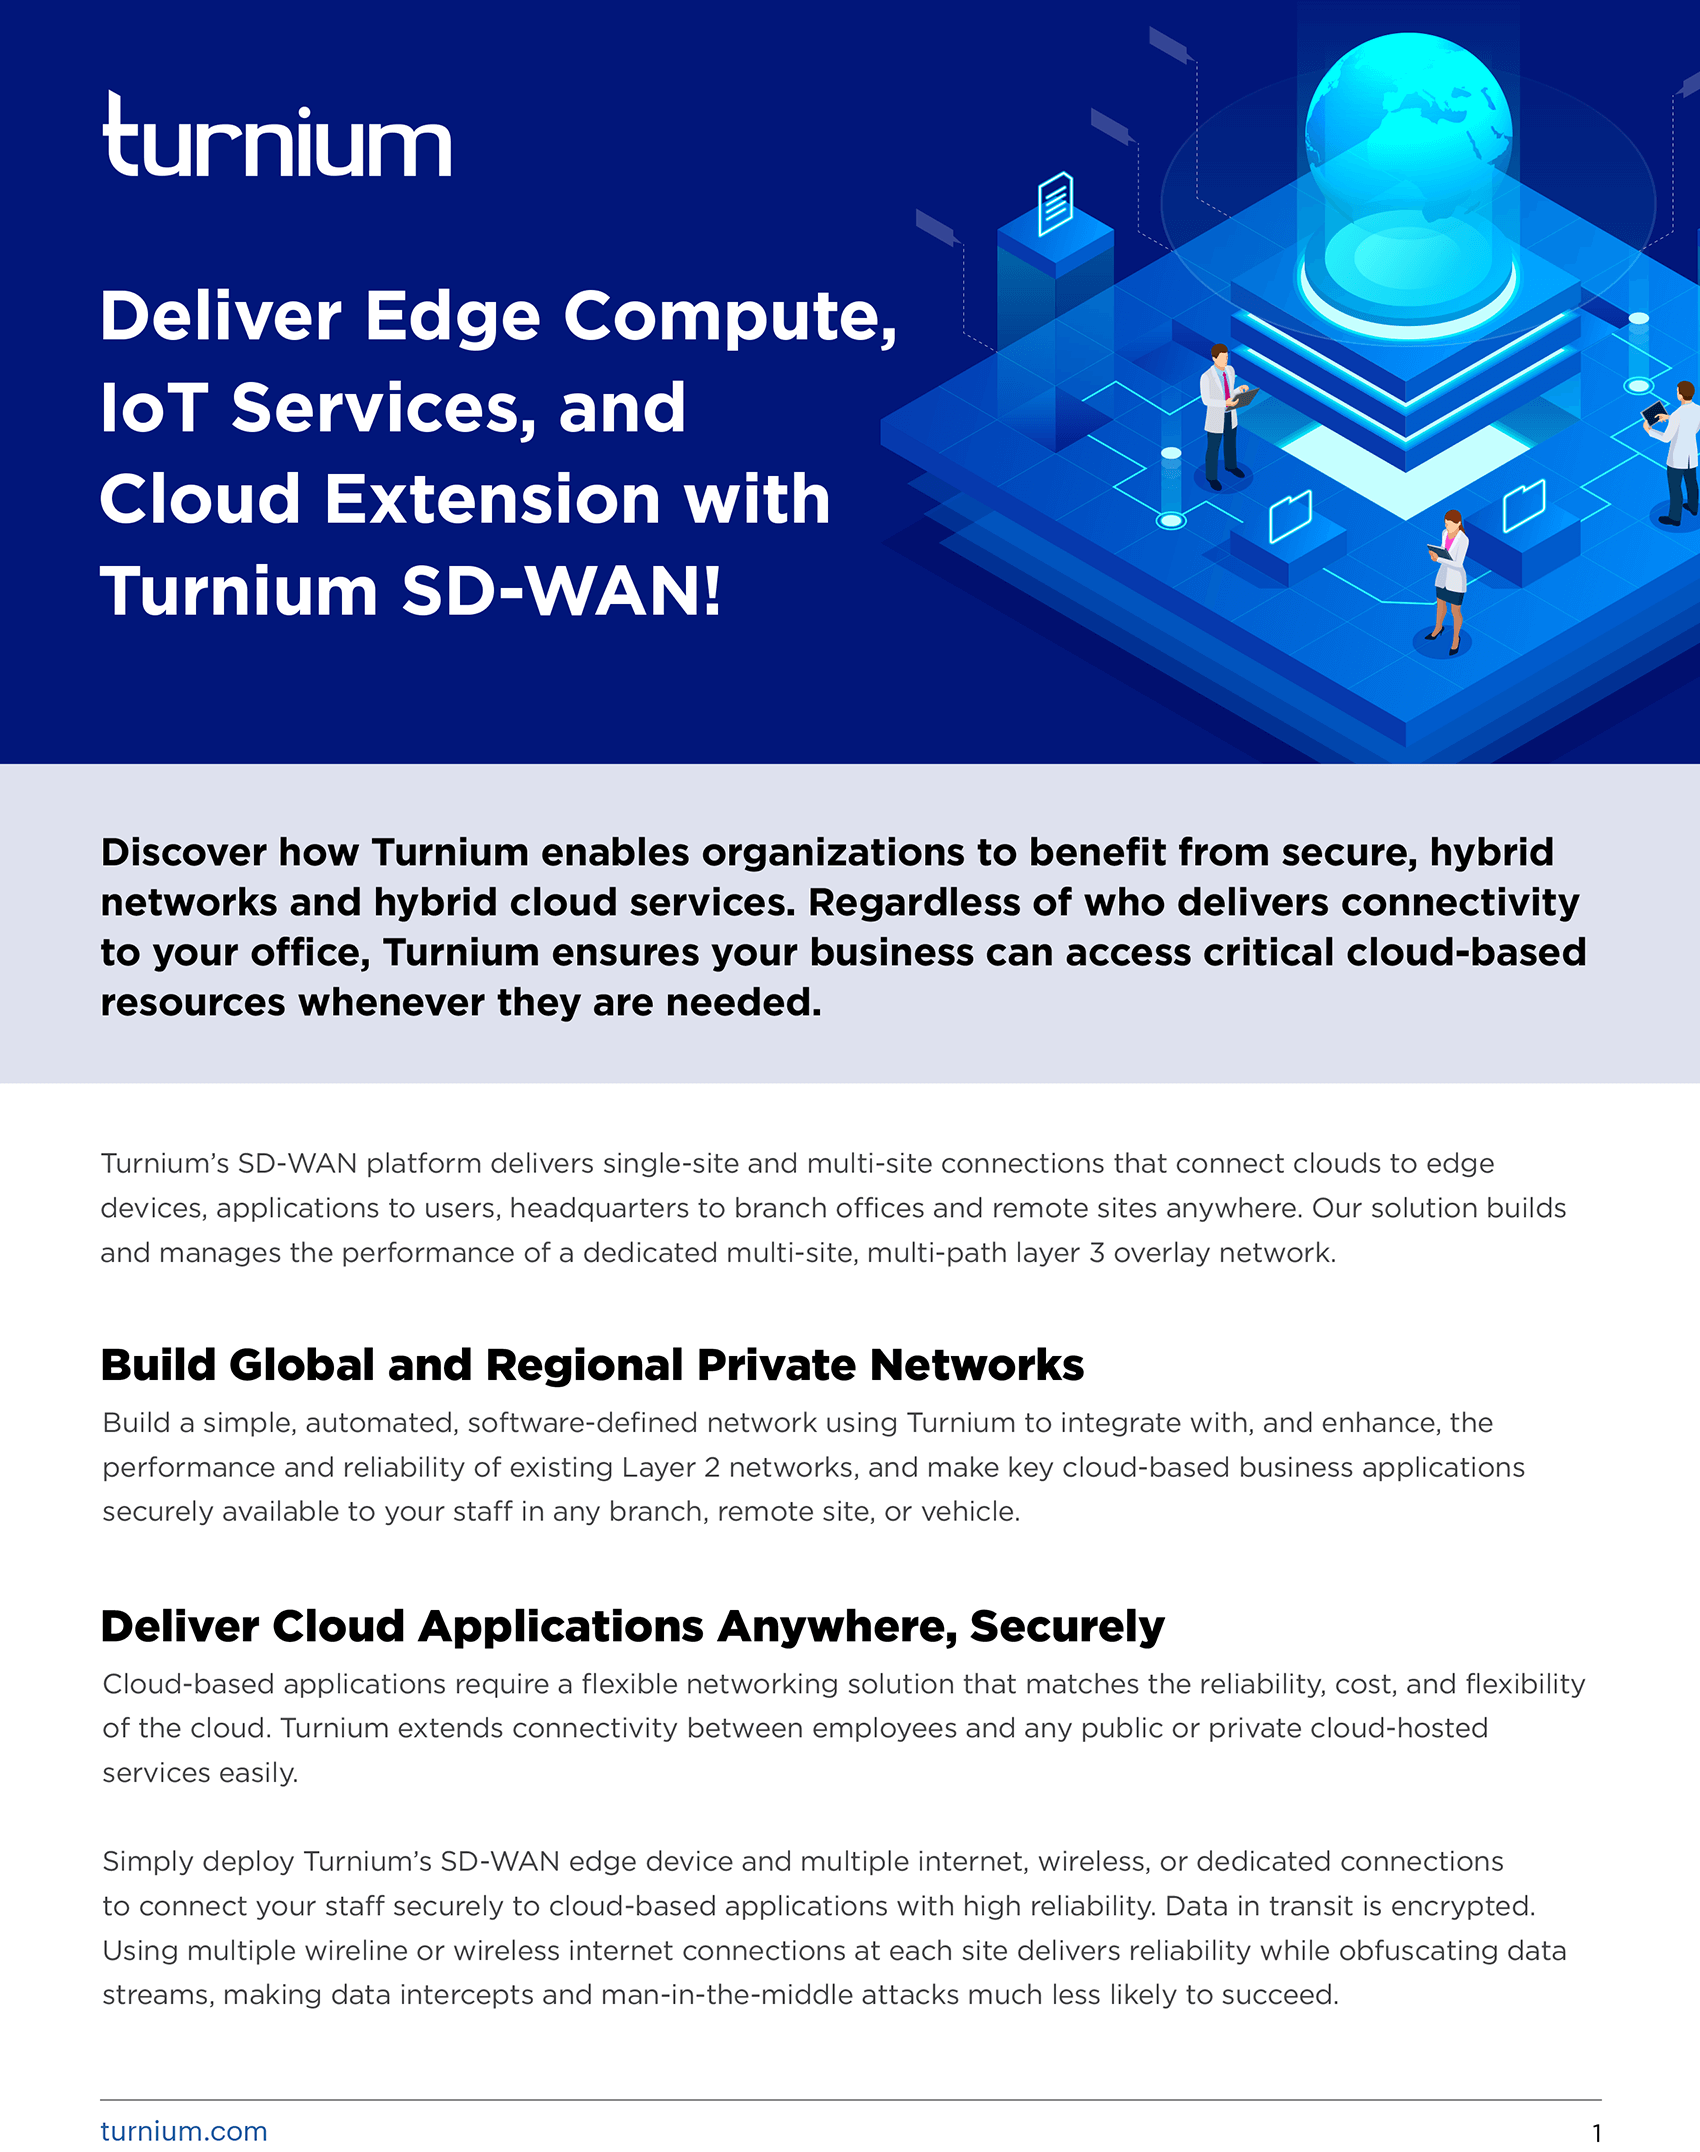 Deliver Edge Compute, IoT Services, and Cloud Extension with Turnium SD-WAN